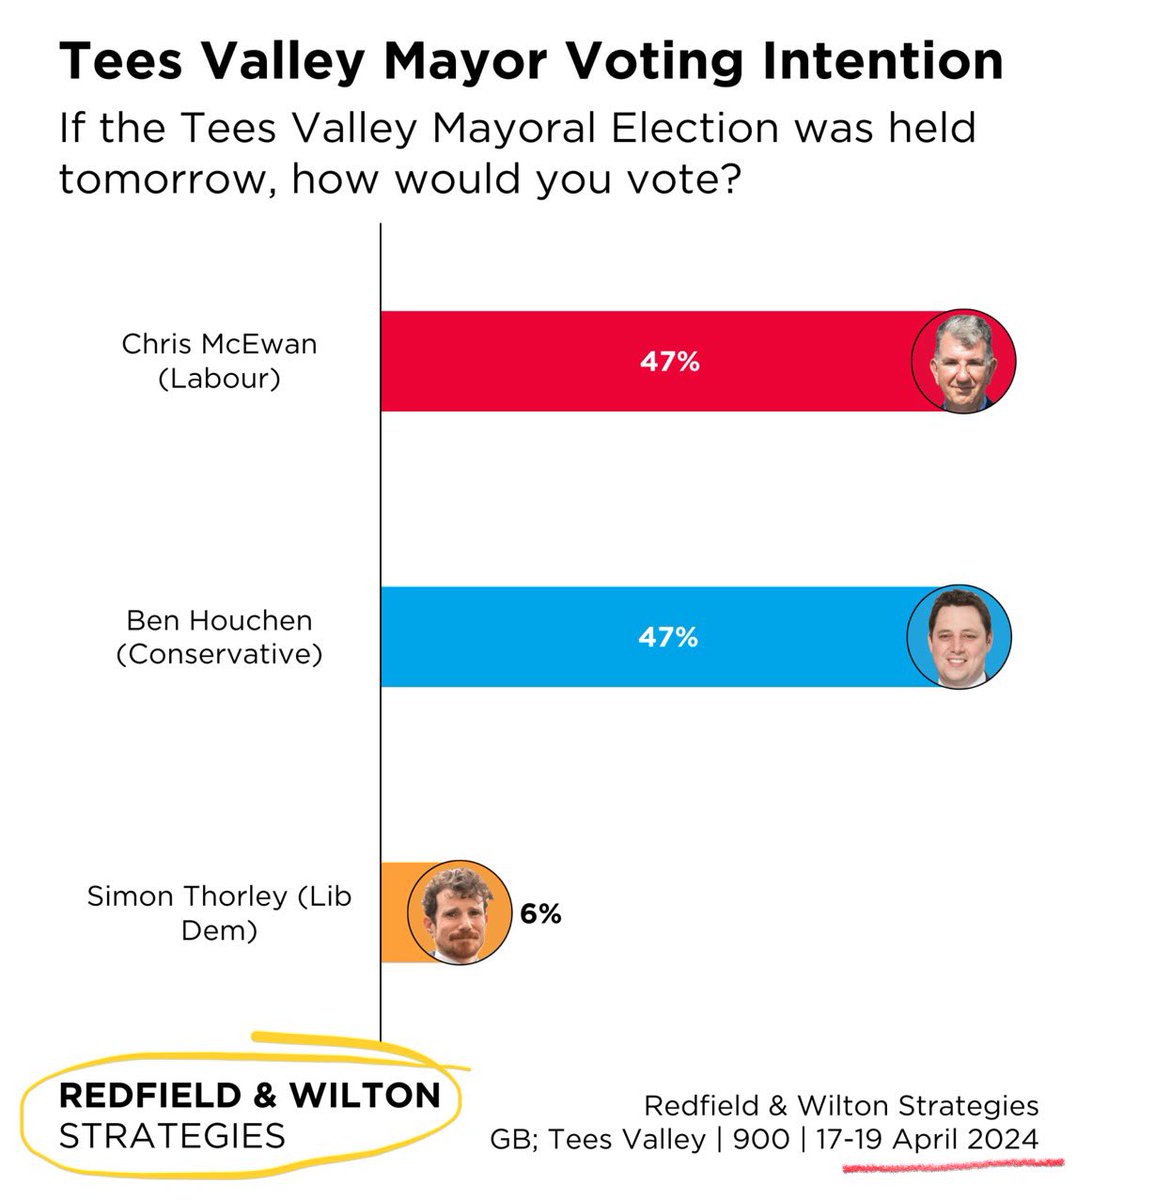 Alot of eyes on #TeesValley 🫣

This from a week ago> redfieldandwiltonstrategies.com/tees-valley-ma… [see diagram]

▫️politicshome.com/news/article/b…

.@Jumazz crunches the numbers 🧮 northeastbylines.co.uk/houchen-in-num… 

⬇️🗳️ see also @DamianSurvation’s comment 
       x.com/damiansurvatio…